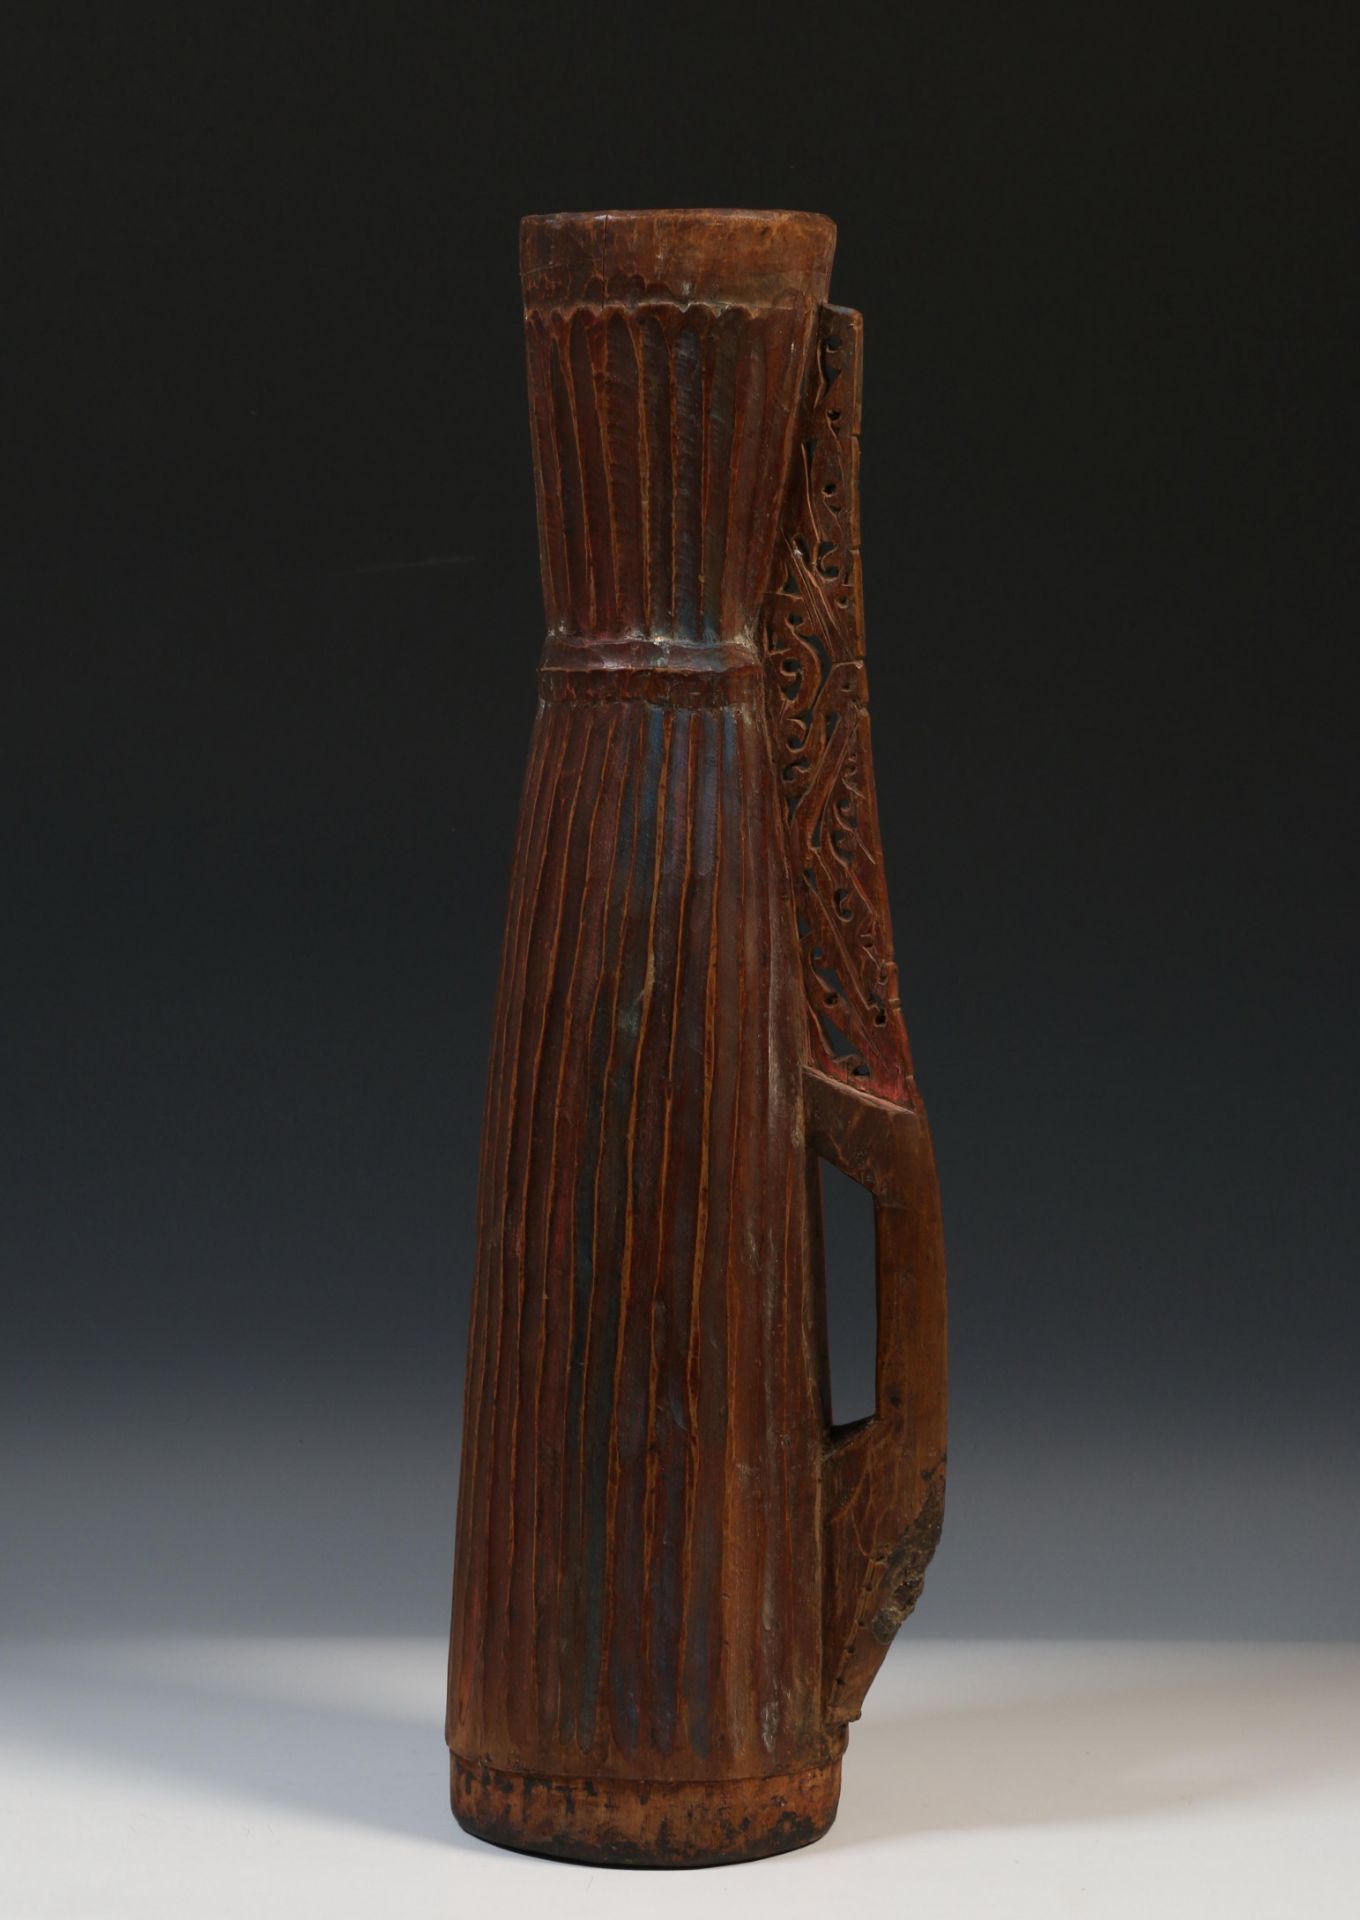 Papua, Cenderawasih Bay, drum, fluted, the handle on lower part openworked, tympanum missing - Image 7 of 7